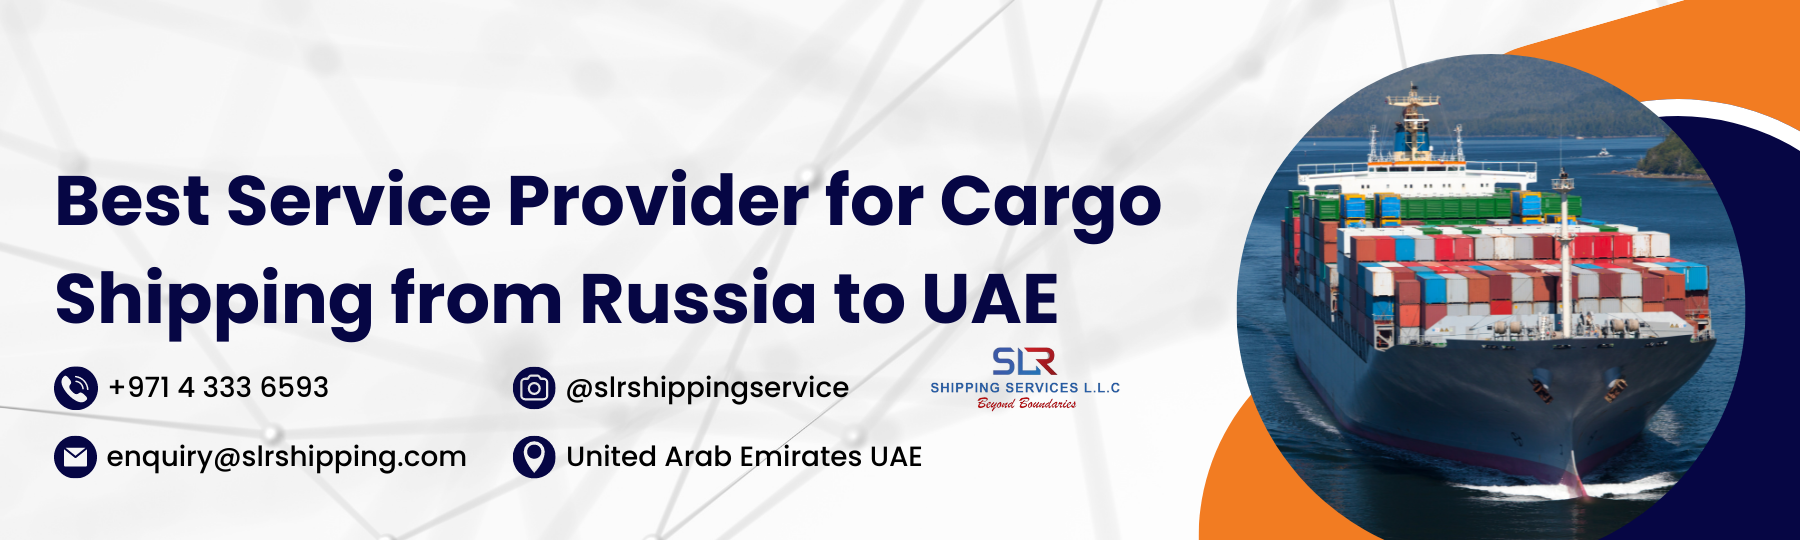 Cargo Shipping from Russia to UAE